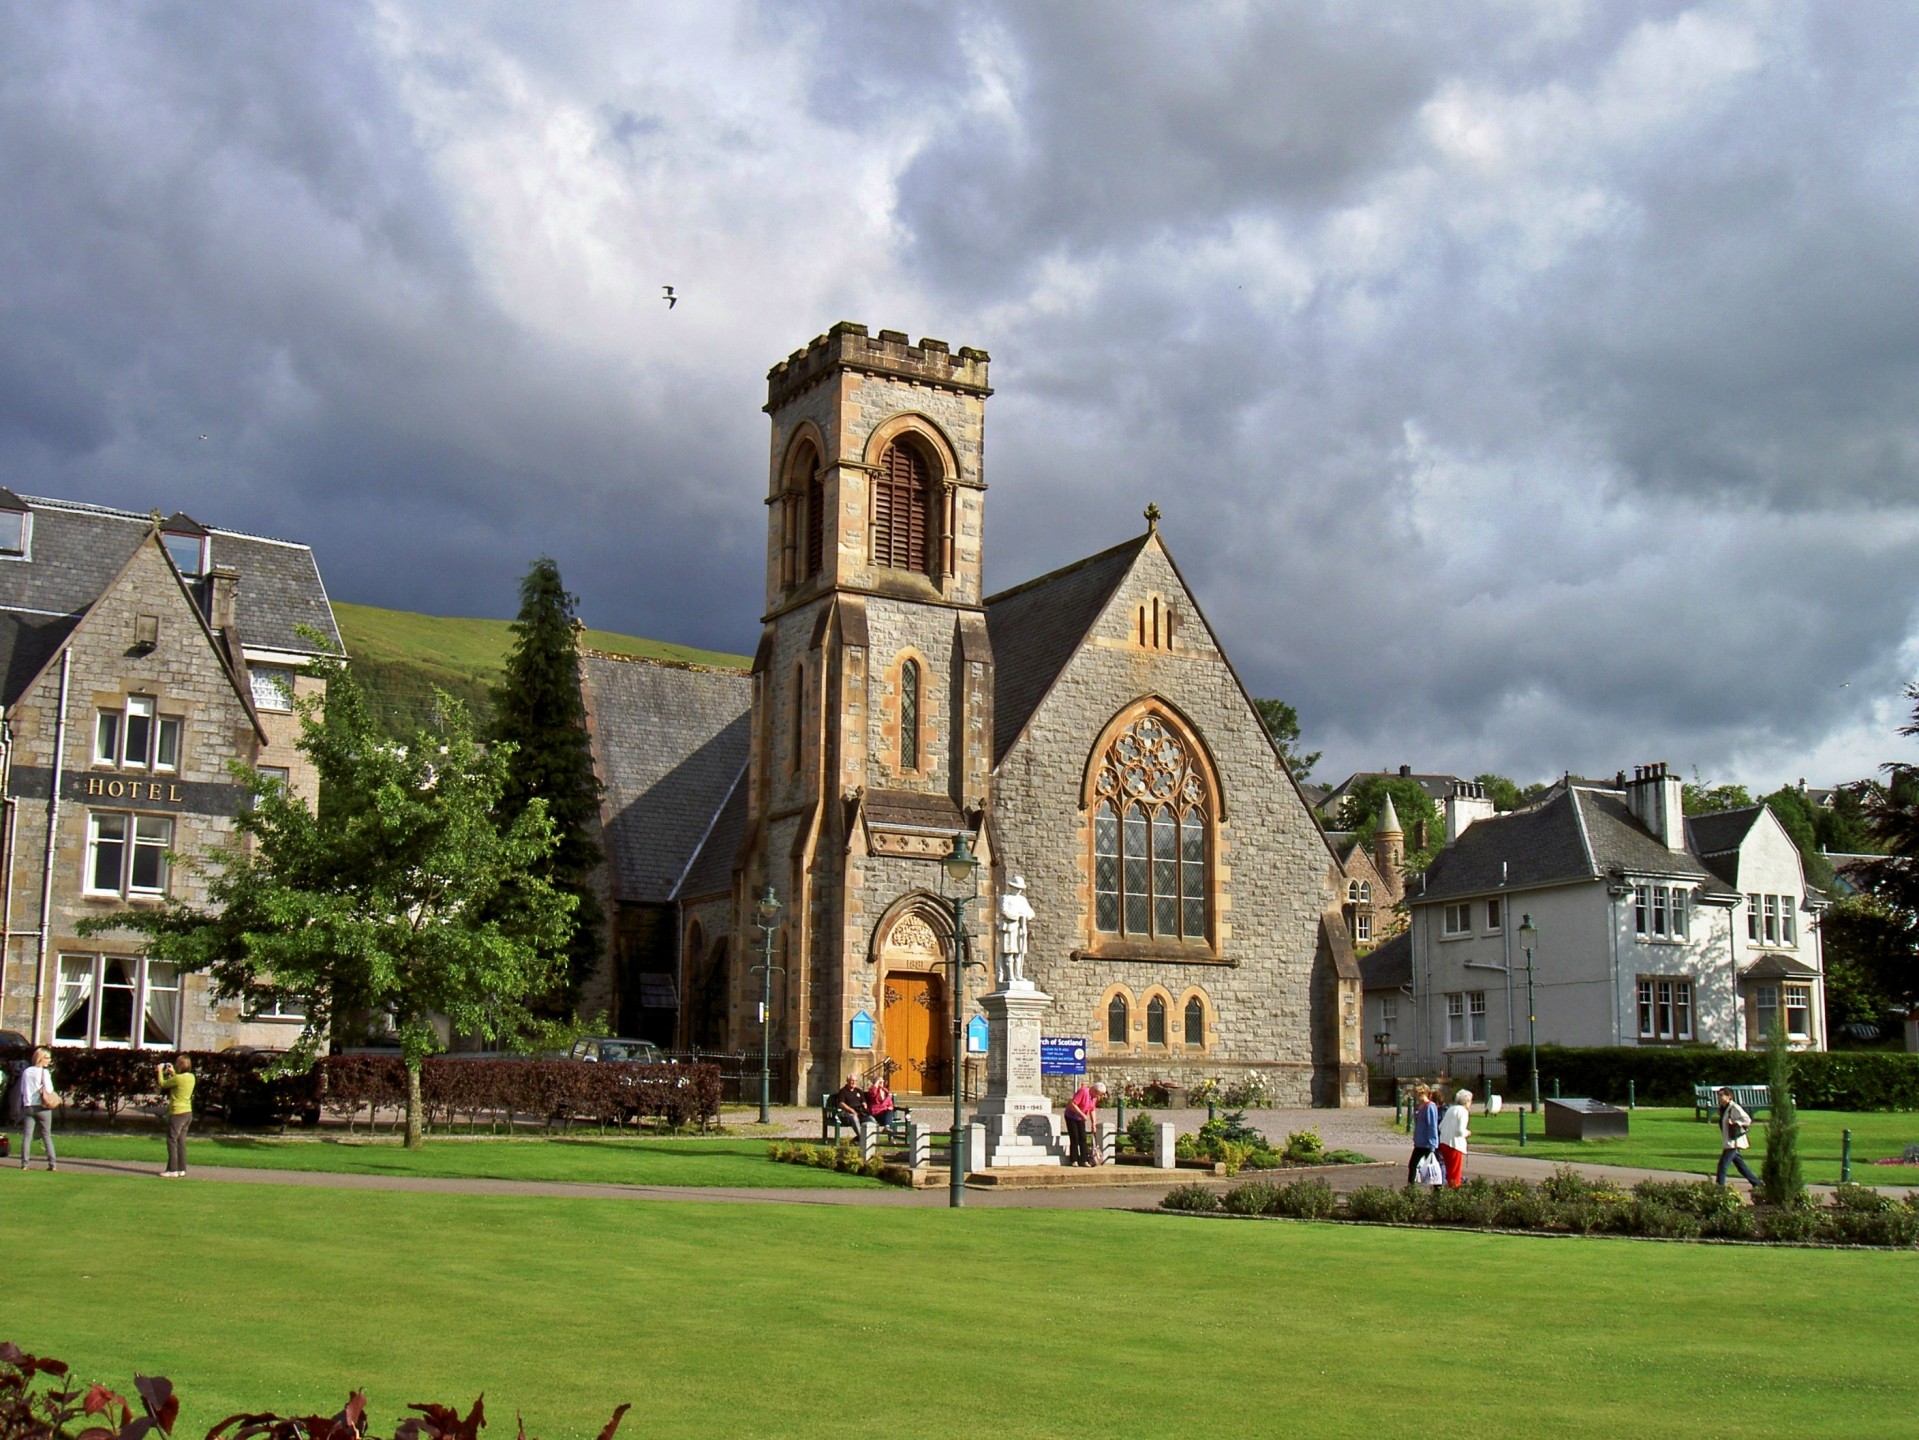 Fort William is a major tourist centre with Glen Coe just to the south, Aonach Mòr to the north and Glenfinnan to the west, on the Road to the Isles.